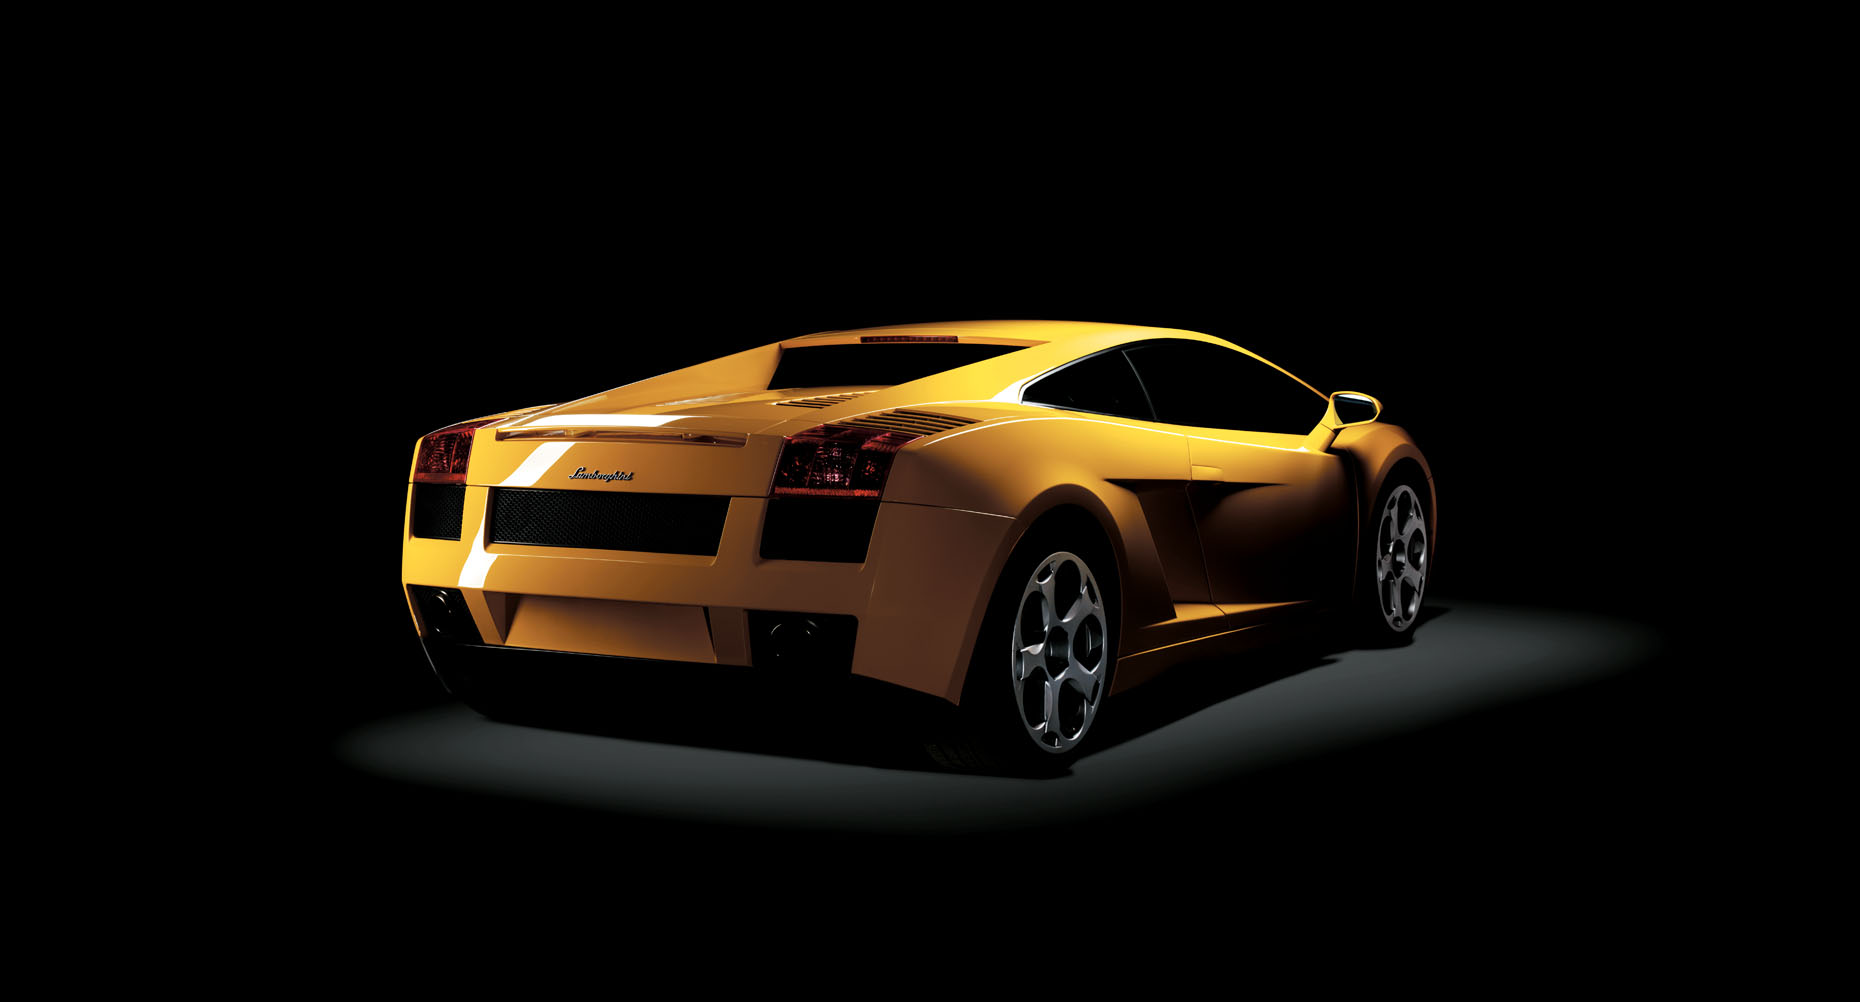  A back shot of a yellow Lamborgini photographed in a studio on a black background. 